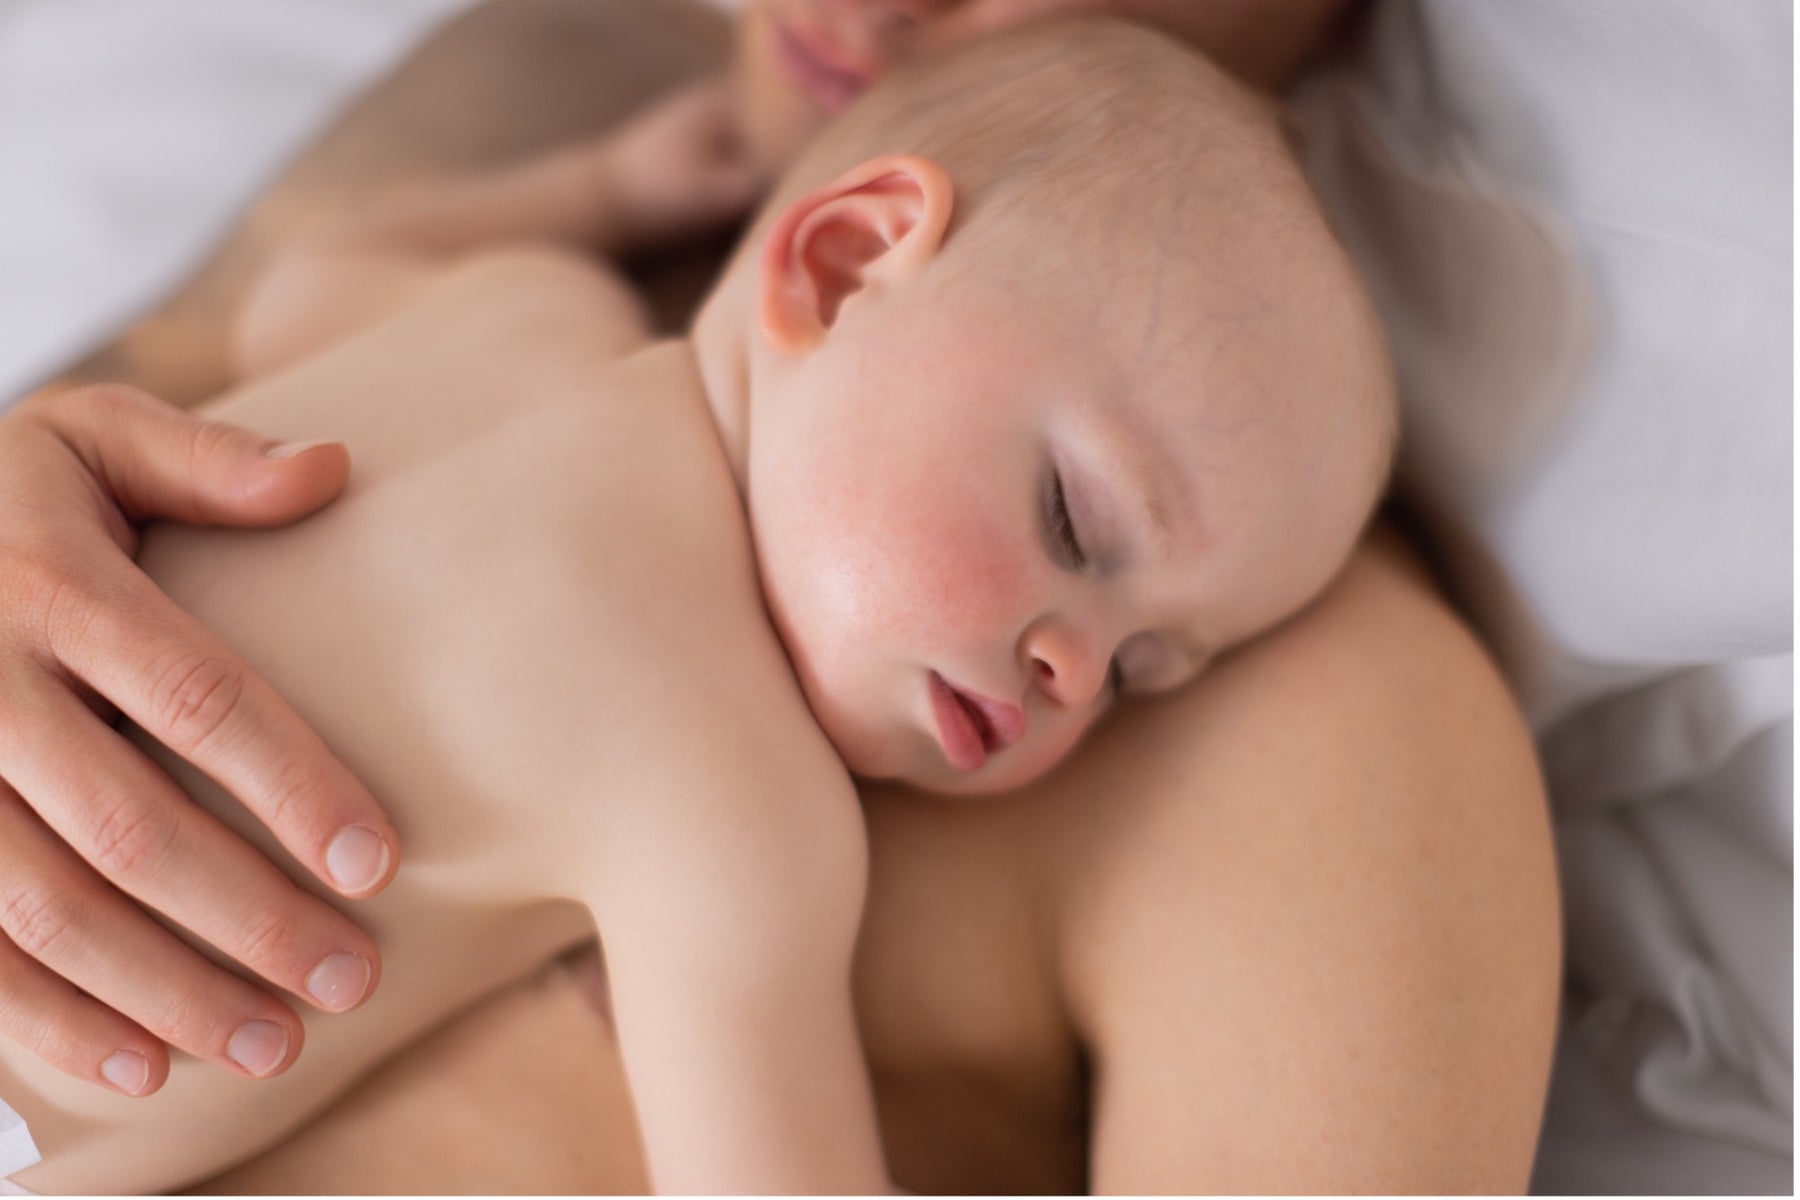 A mother holds her baby doing skin-to-skin contact